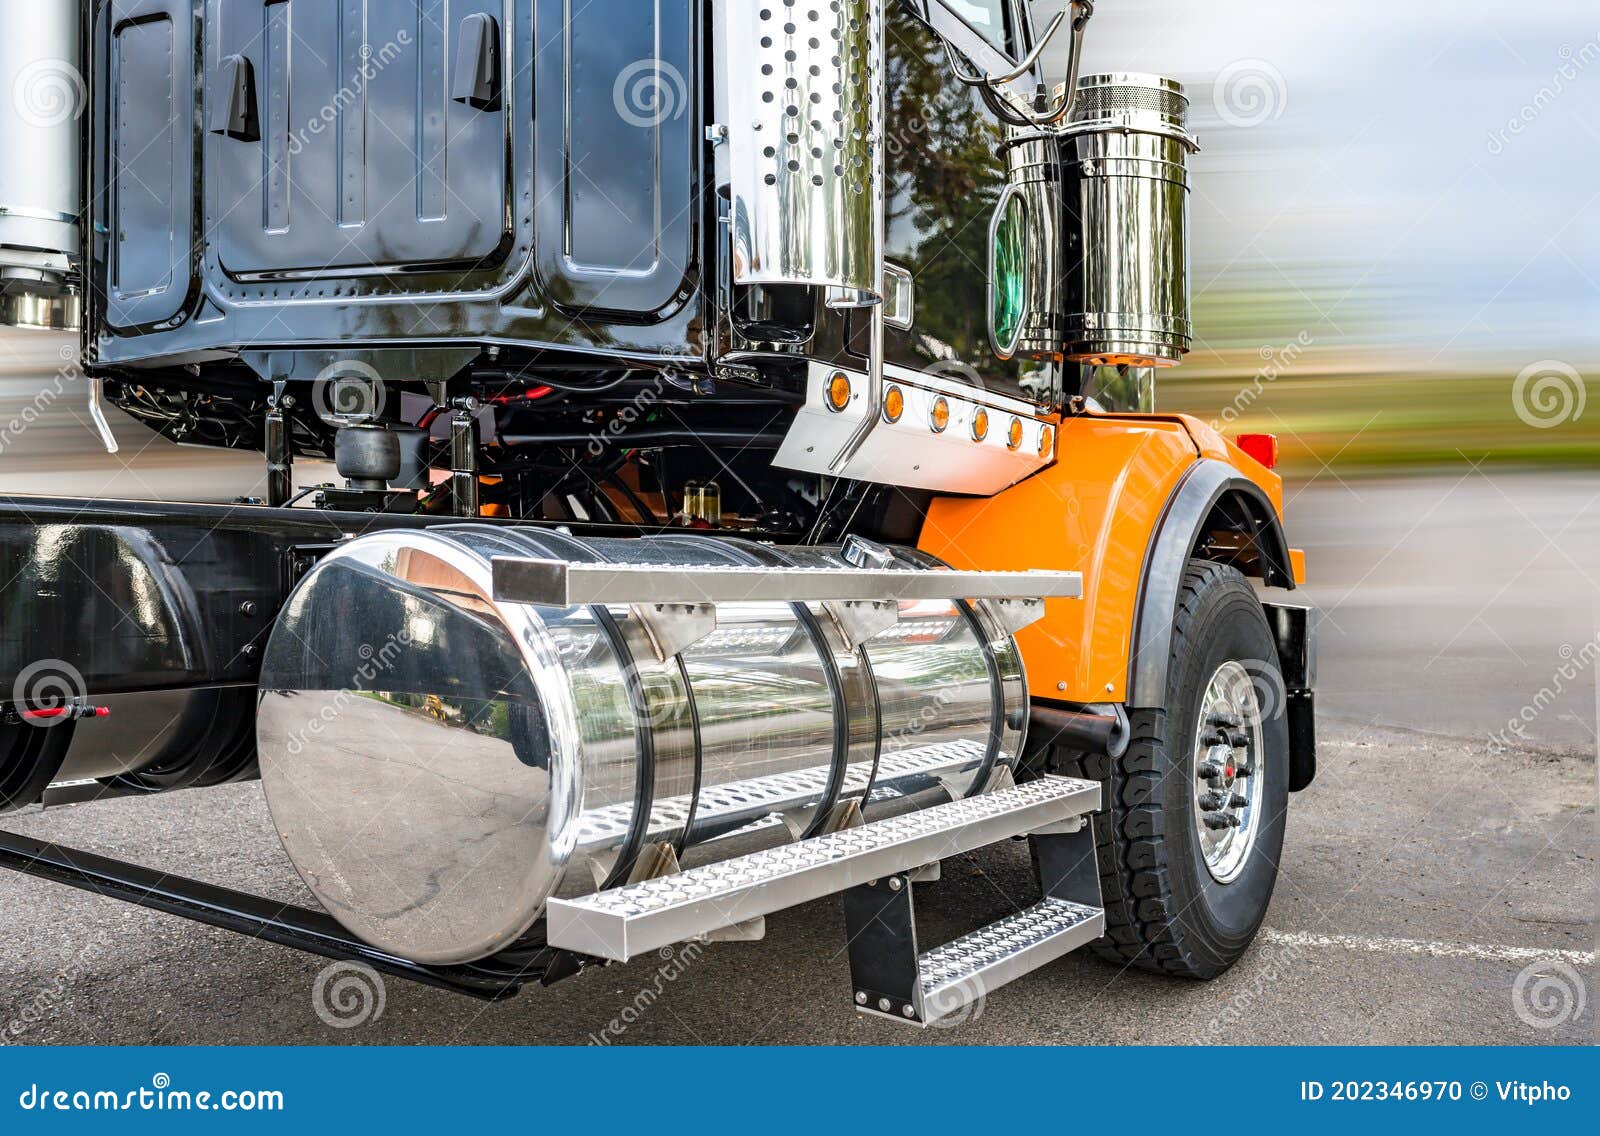 Shiny Big Rig Semi Truck Tractor in Black and Orange with Polisher Aluminum Fuel Tanks and Steps and Another Accessories Ready To Stock Photo - Image of haul, cargo: 202346970